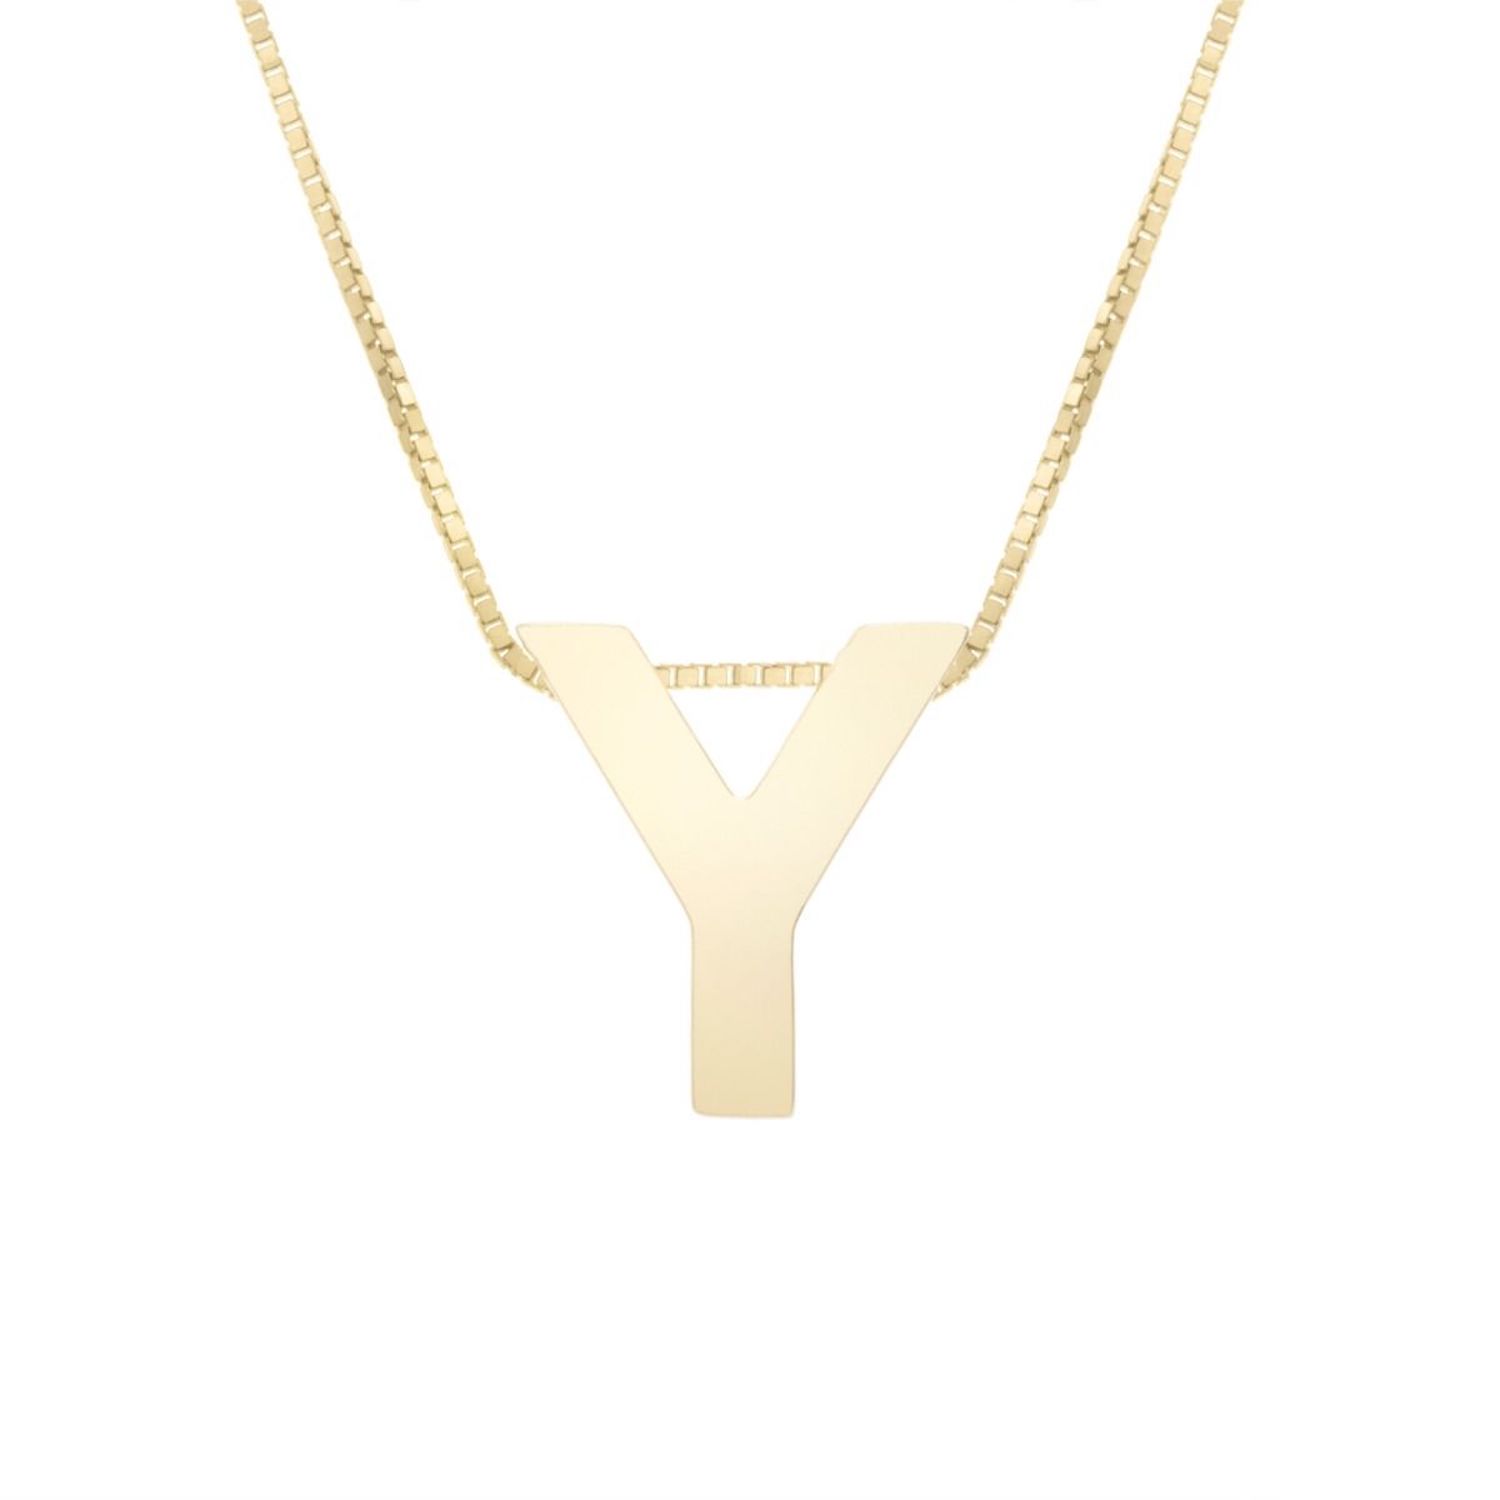 14K Yellow Gold Block Letter Initial Pendant Box Chain Necklace 16"-18" - Y